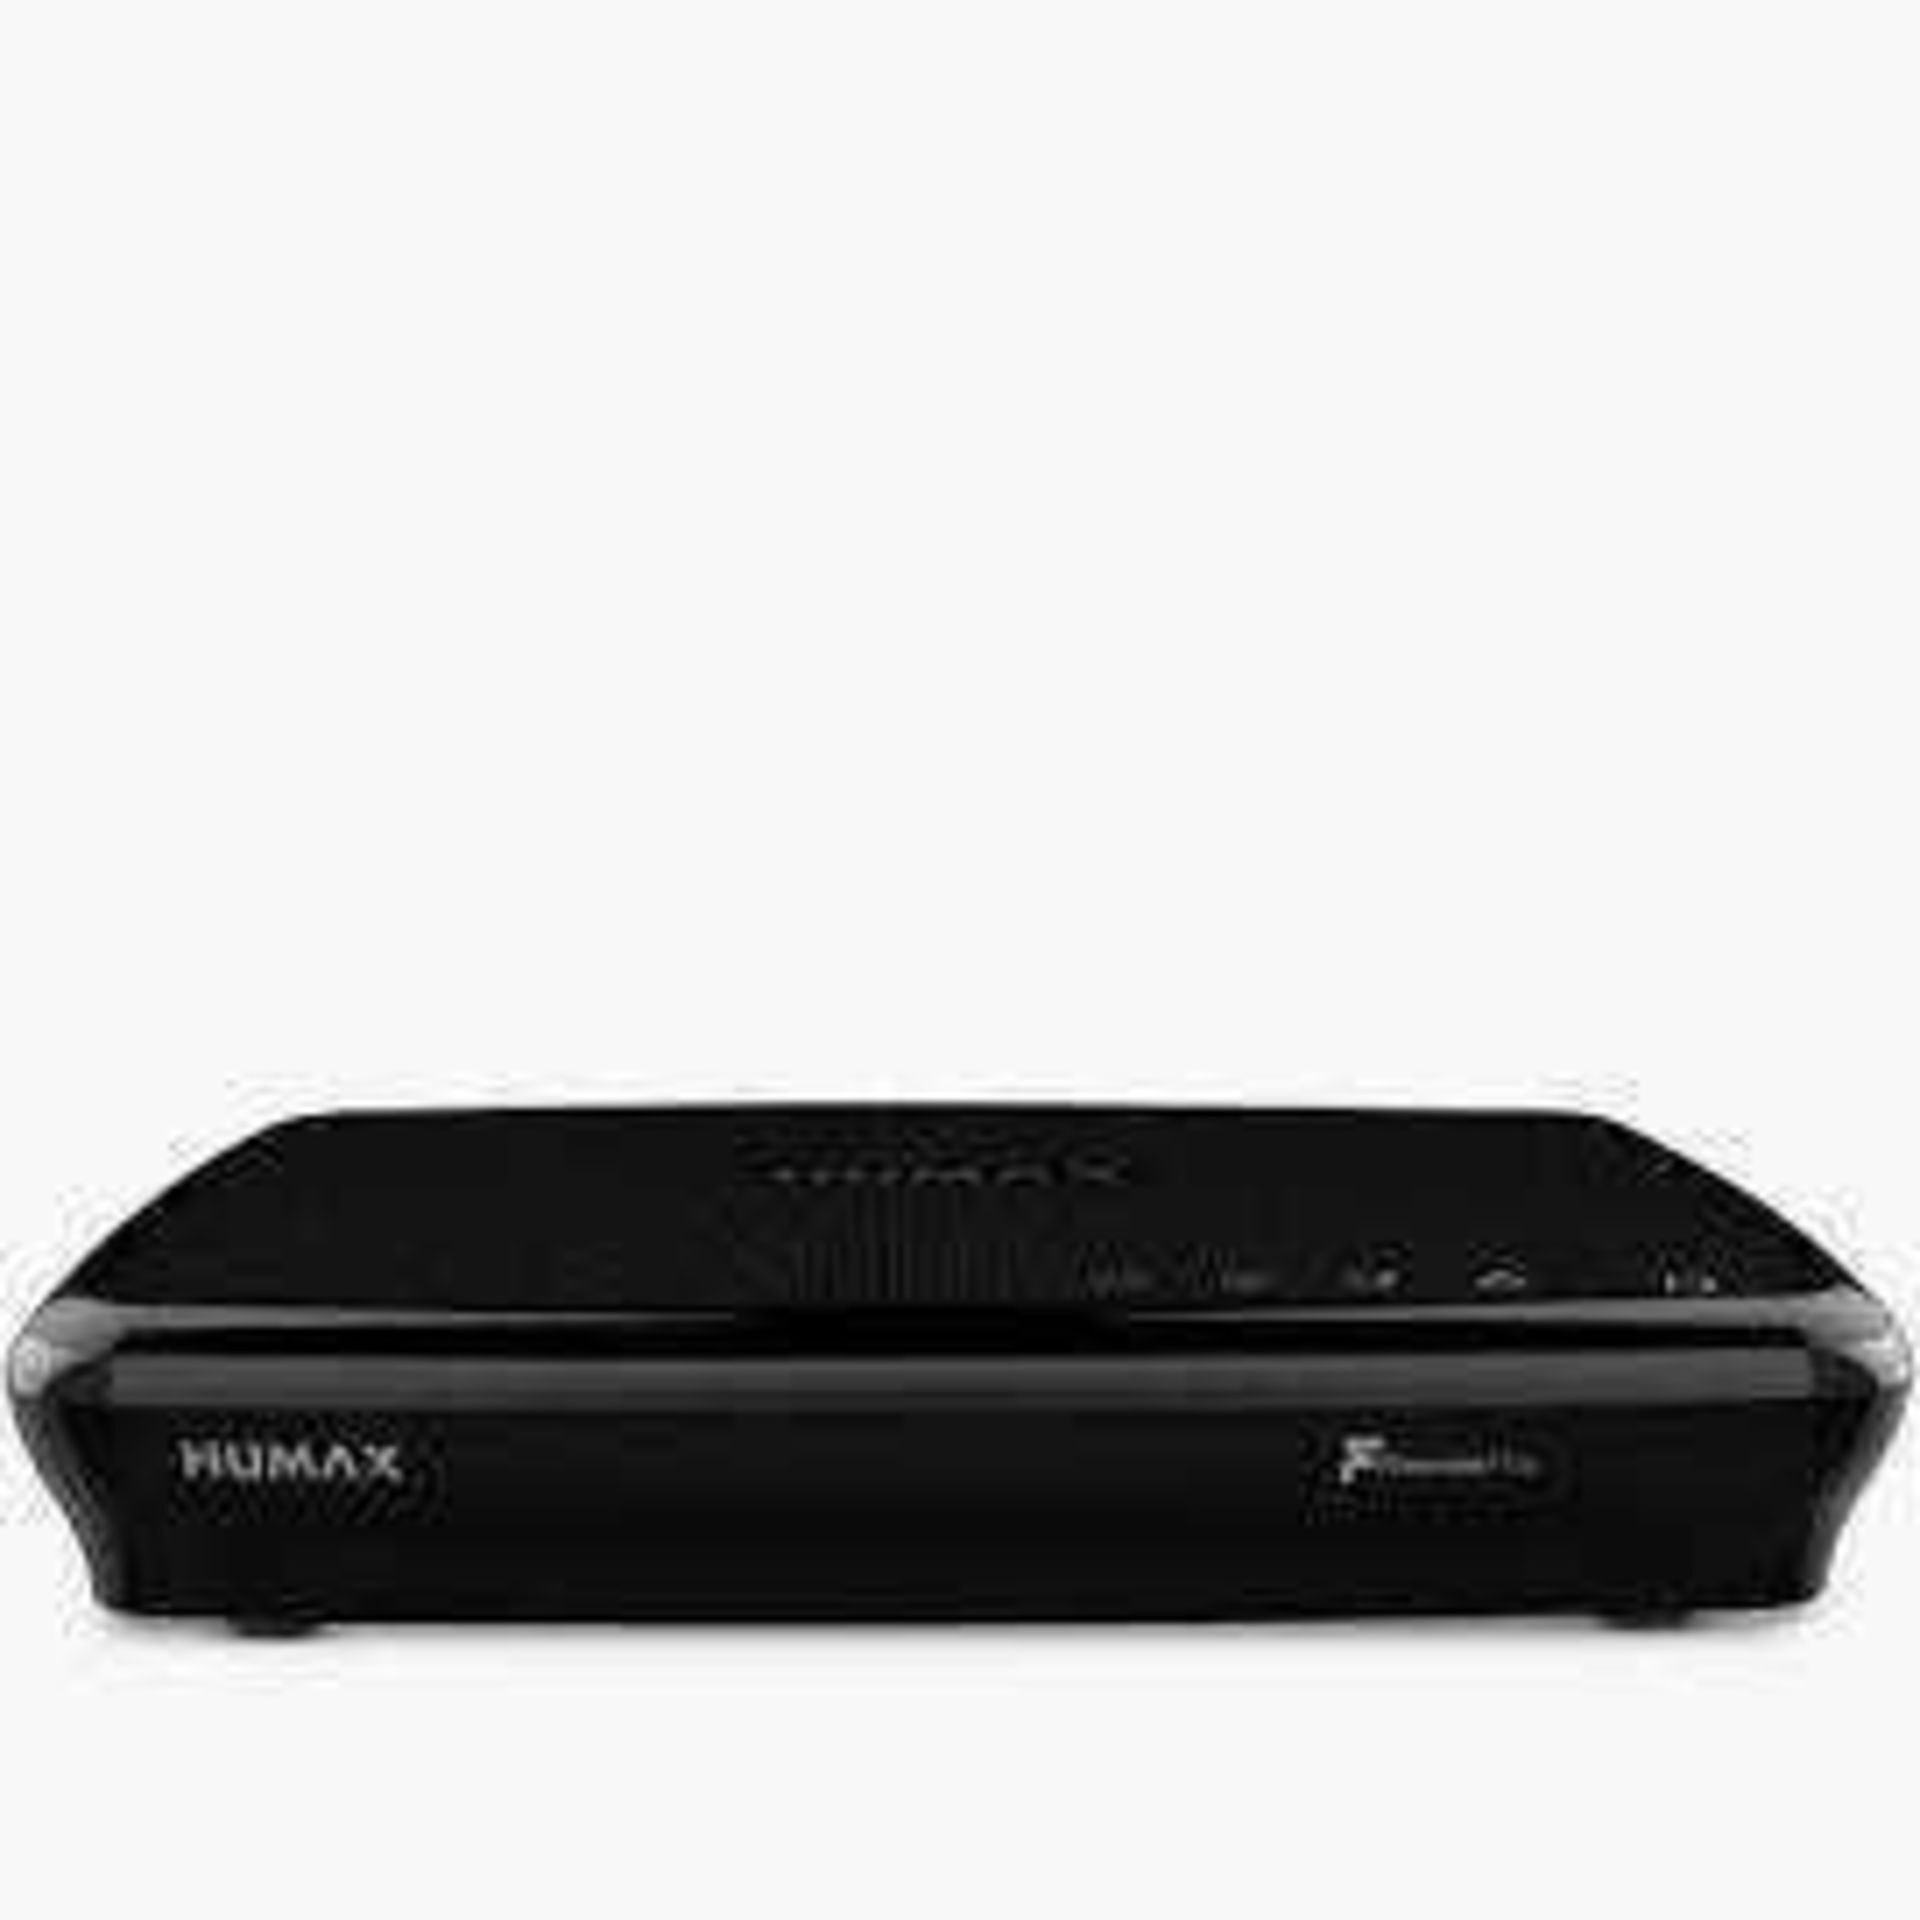 RRP £180 Boxed Humax Fvp5000T 500Gb (Carbon Black) Freeview Play Recorder 500Gb Hard Drive Pvr. Test